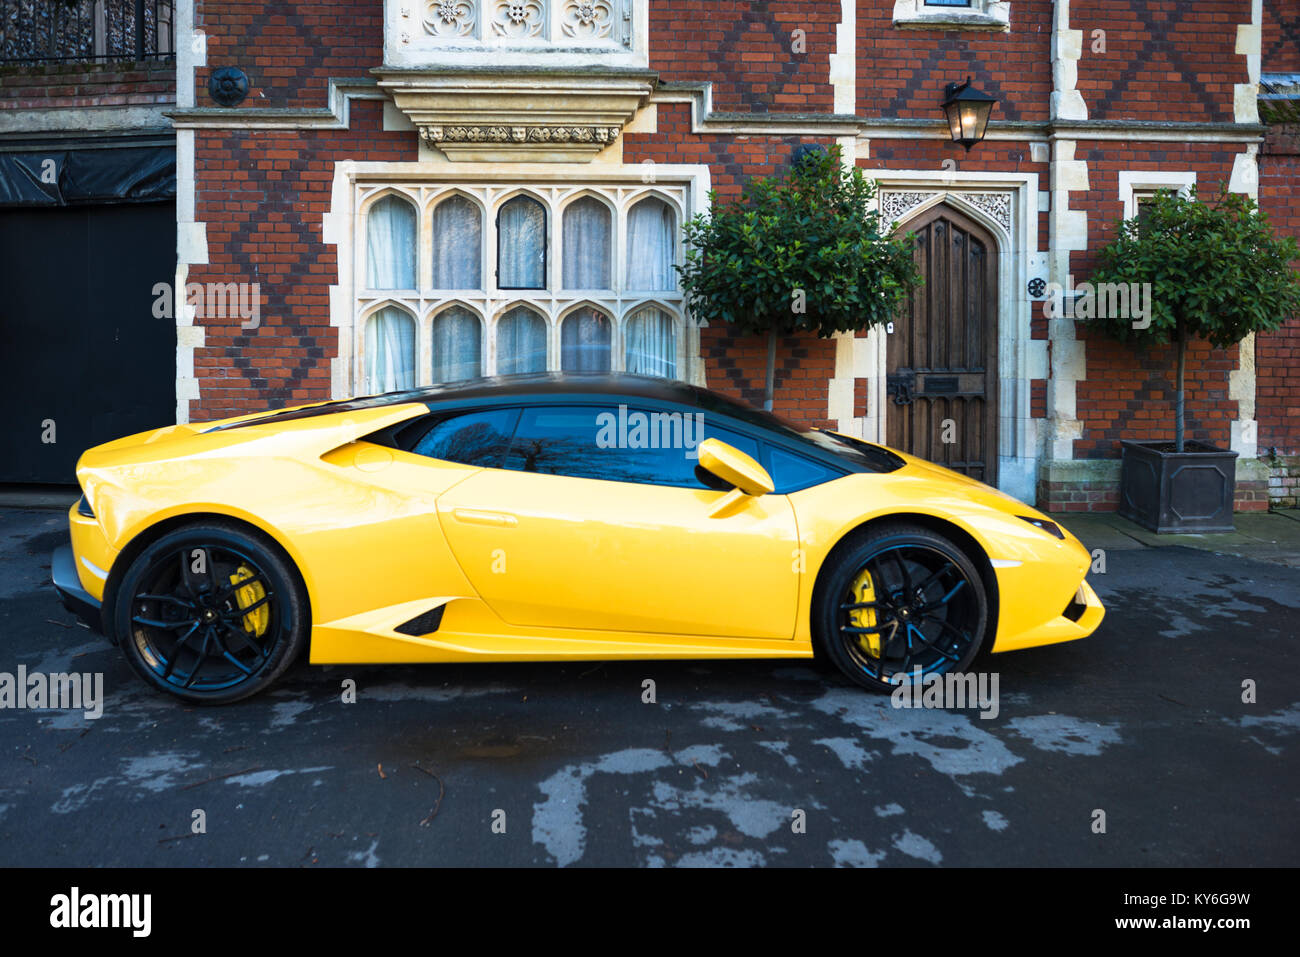 Yellow Lamborghini parked outside grand old house on Chequer Square next to the Norman tower & facing the Great churchyard, Bury St. Edmunds, Suffolk, Stock Photo